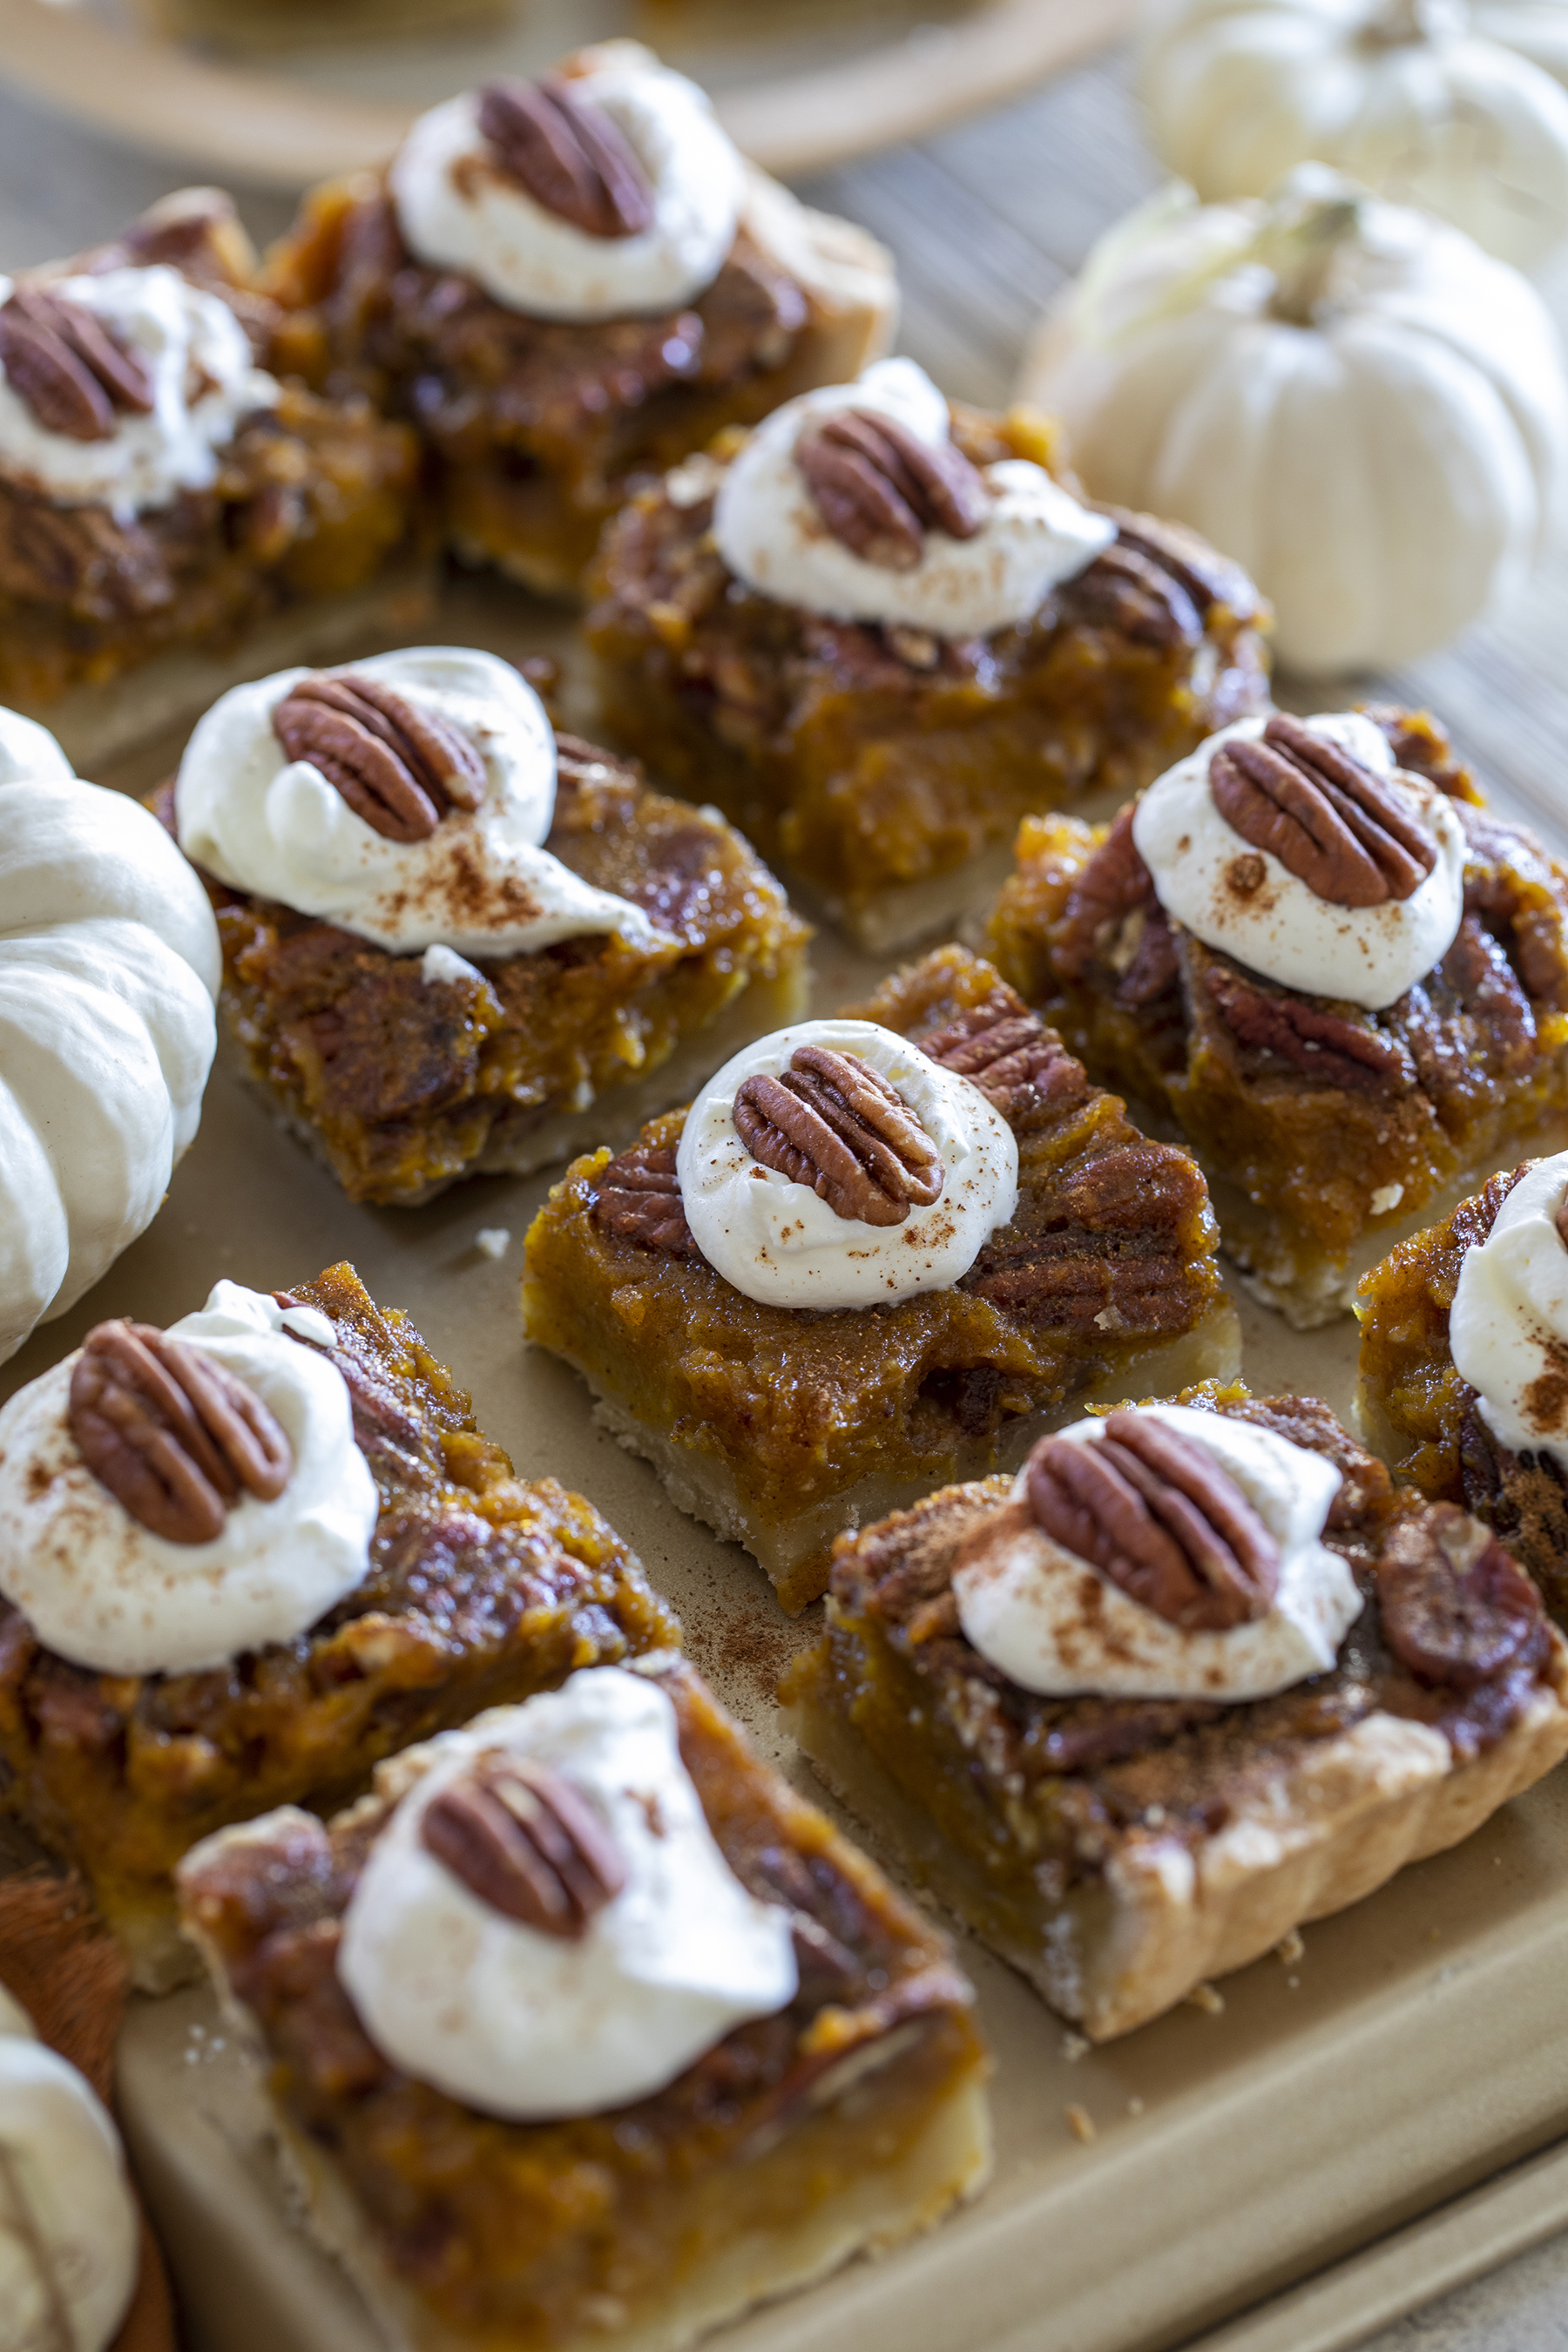 A treat for every family member with pumpkin pie, pecan and vanilla flavors.